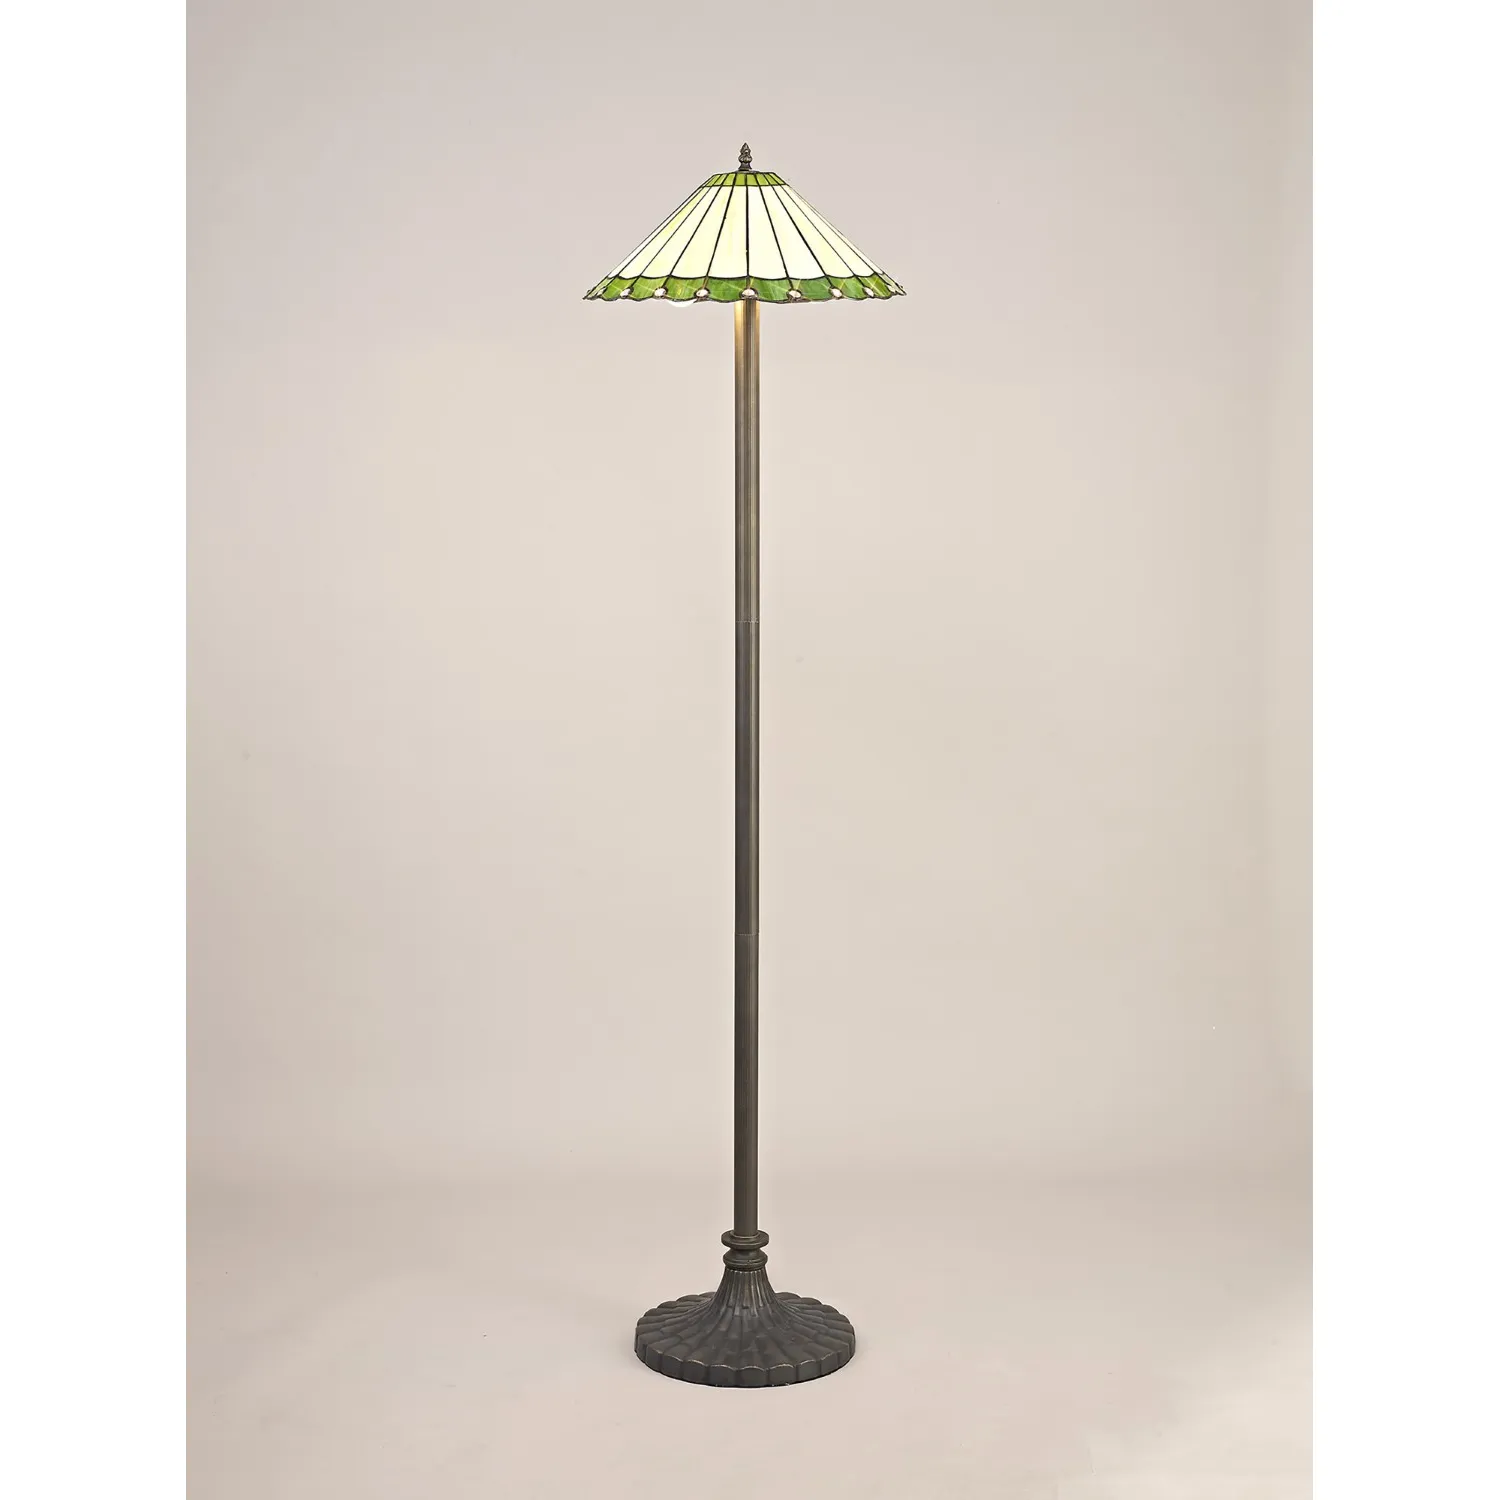 Ware 2 Light Stepped Design Floor Lamp E27 With 40cm Tiffany Shade, Green Cream Crystal Aged Antique Brass